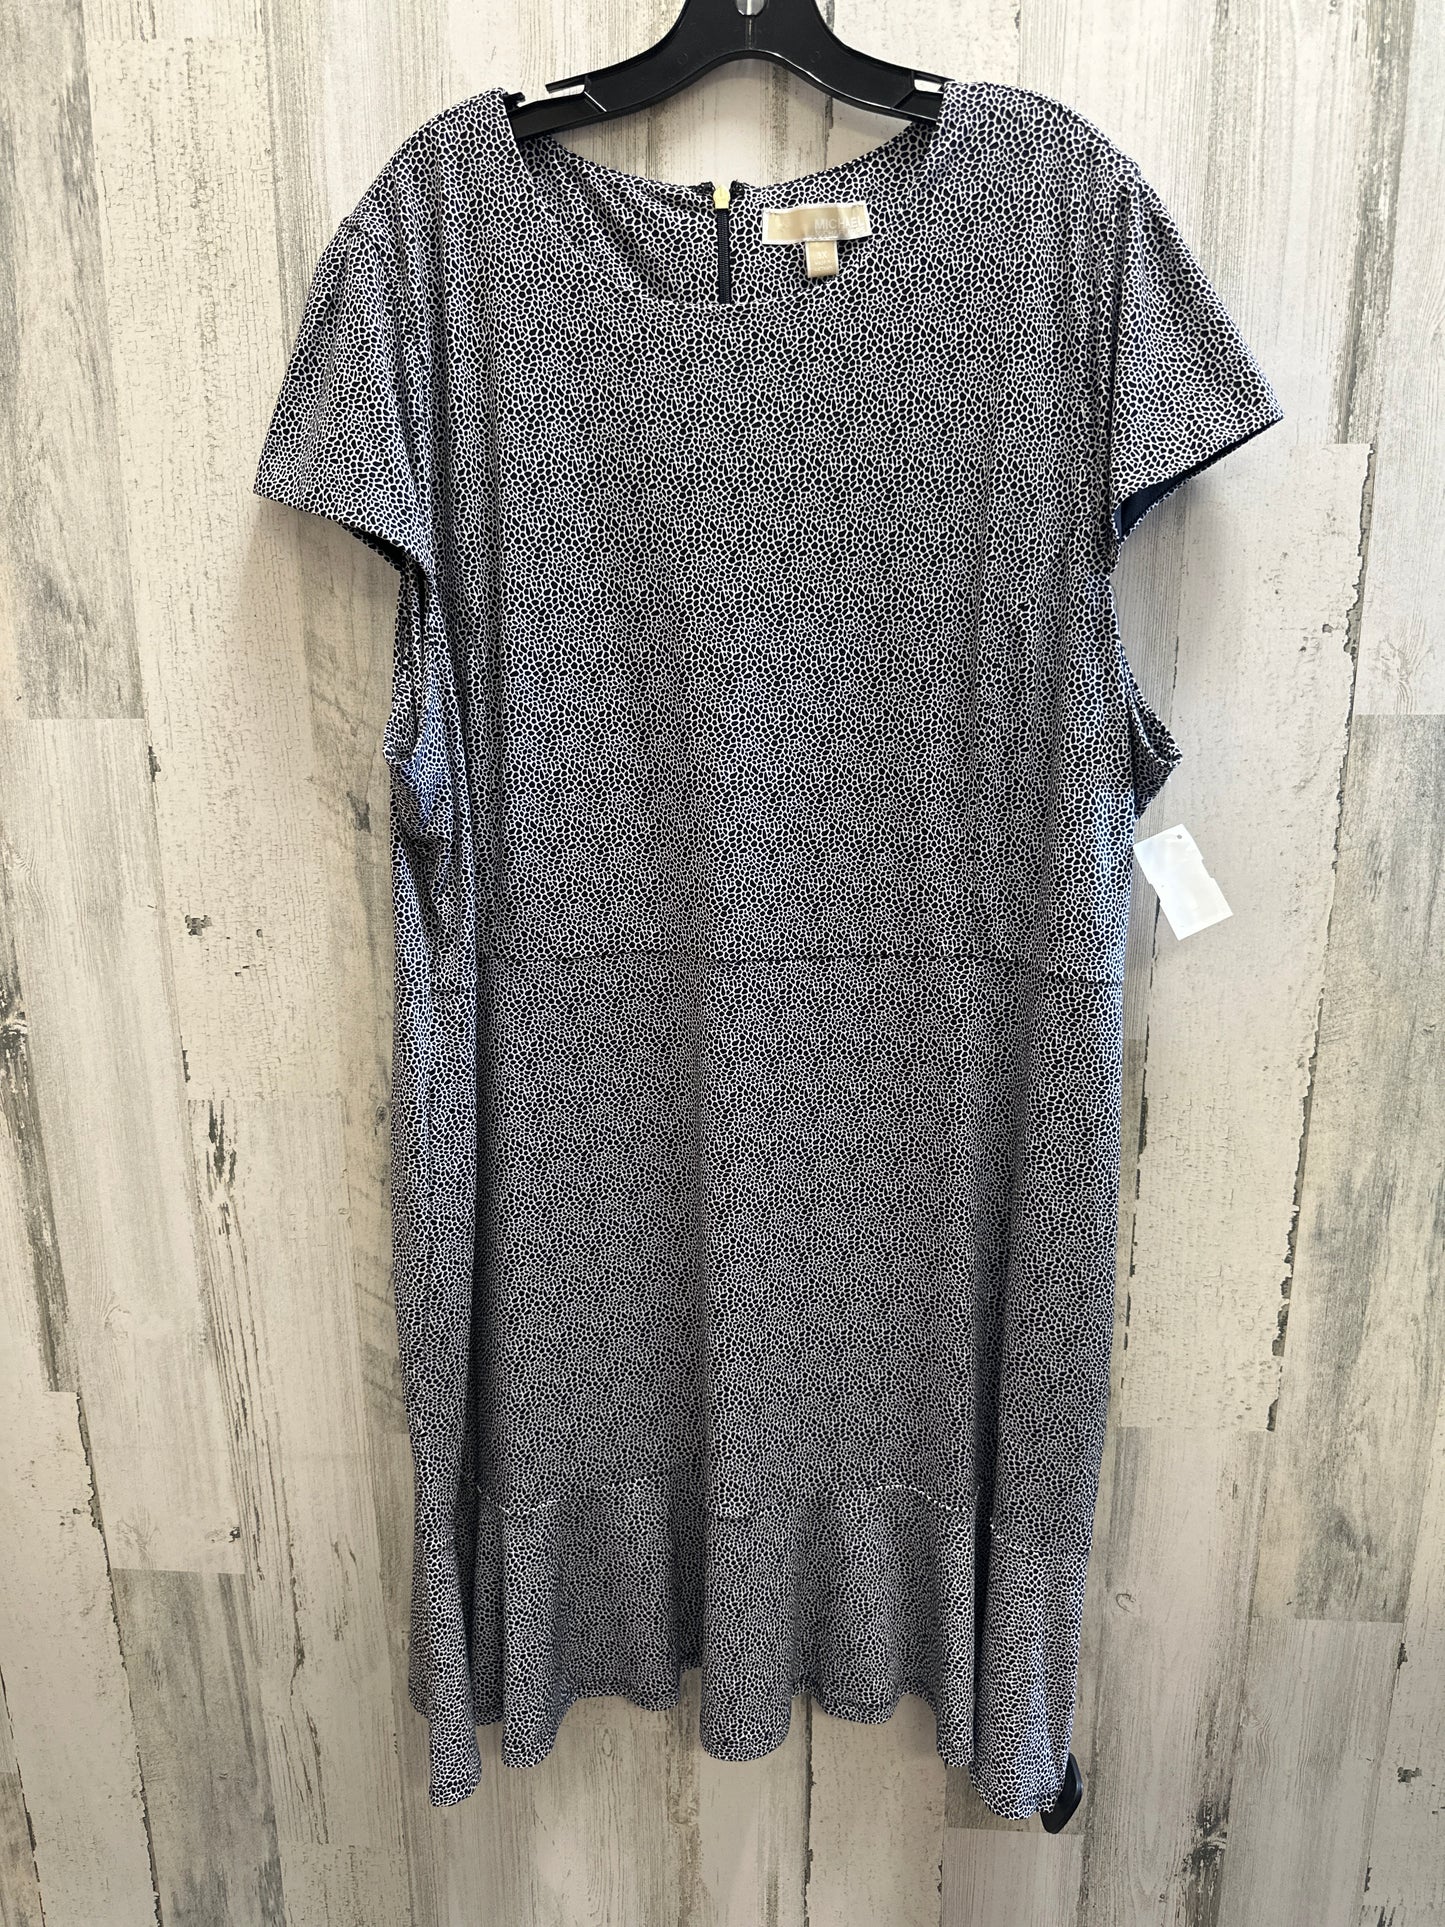 Dress Casual Short By Michael Kors  Size: 3x